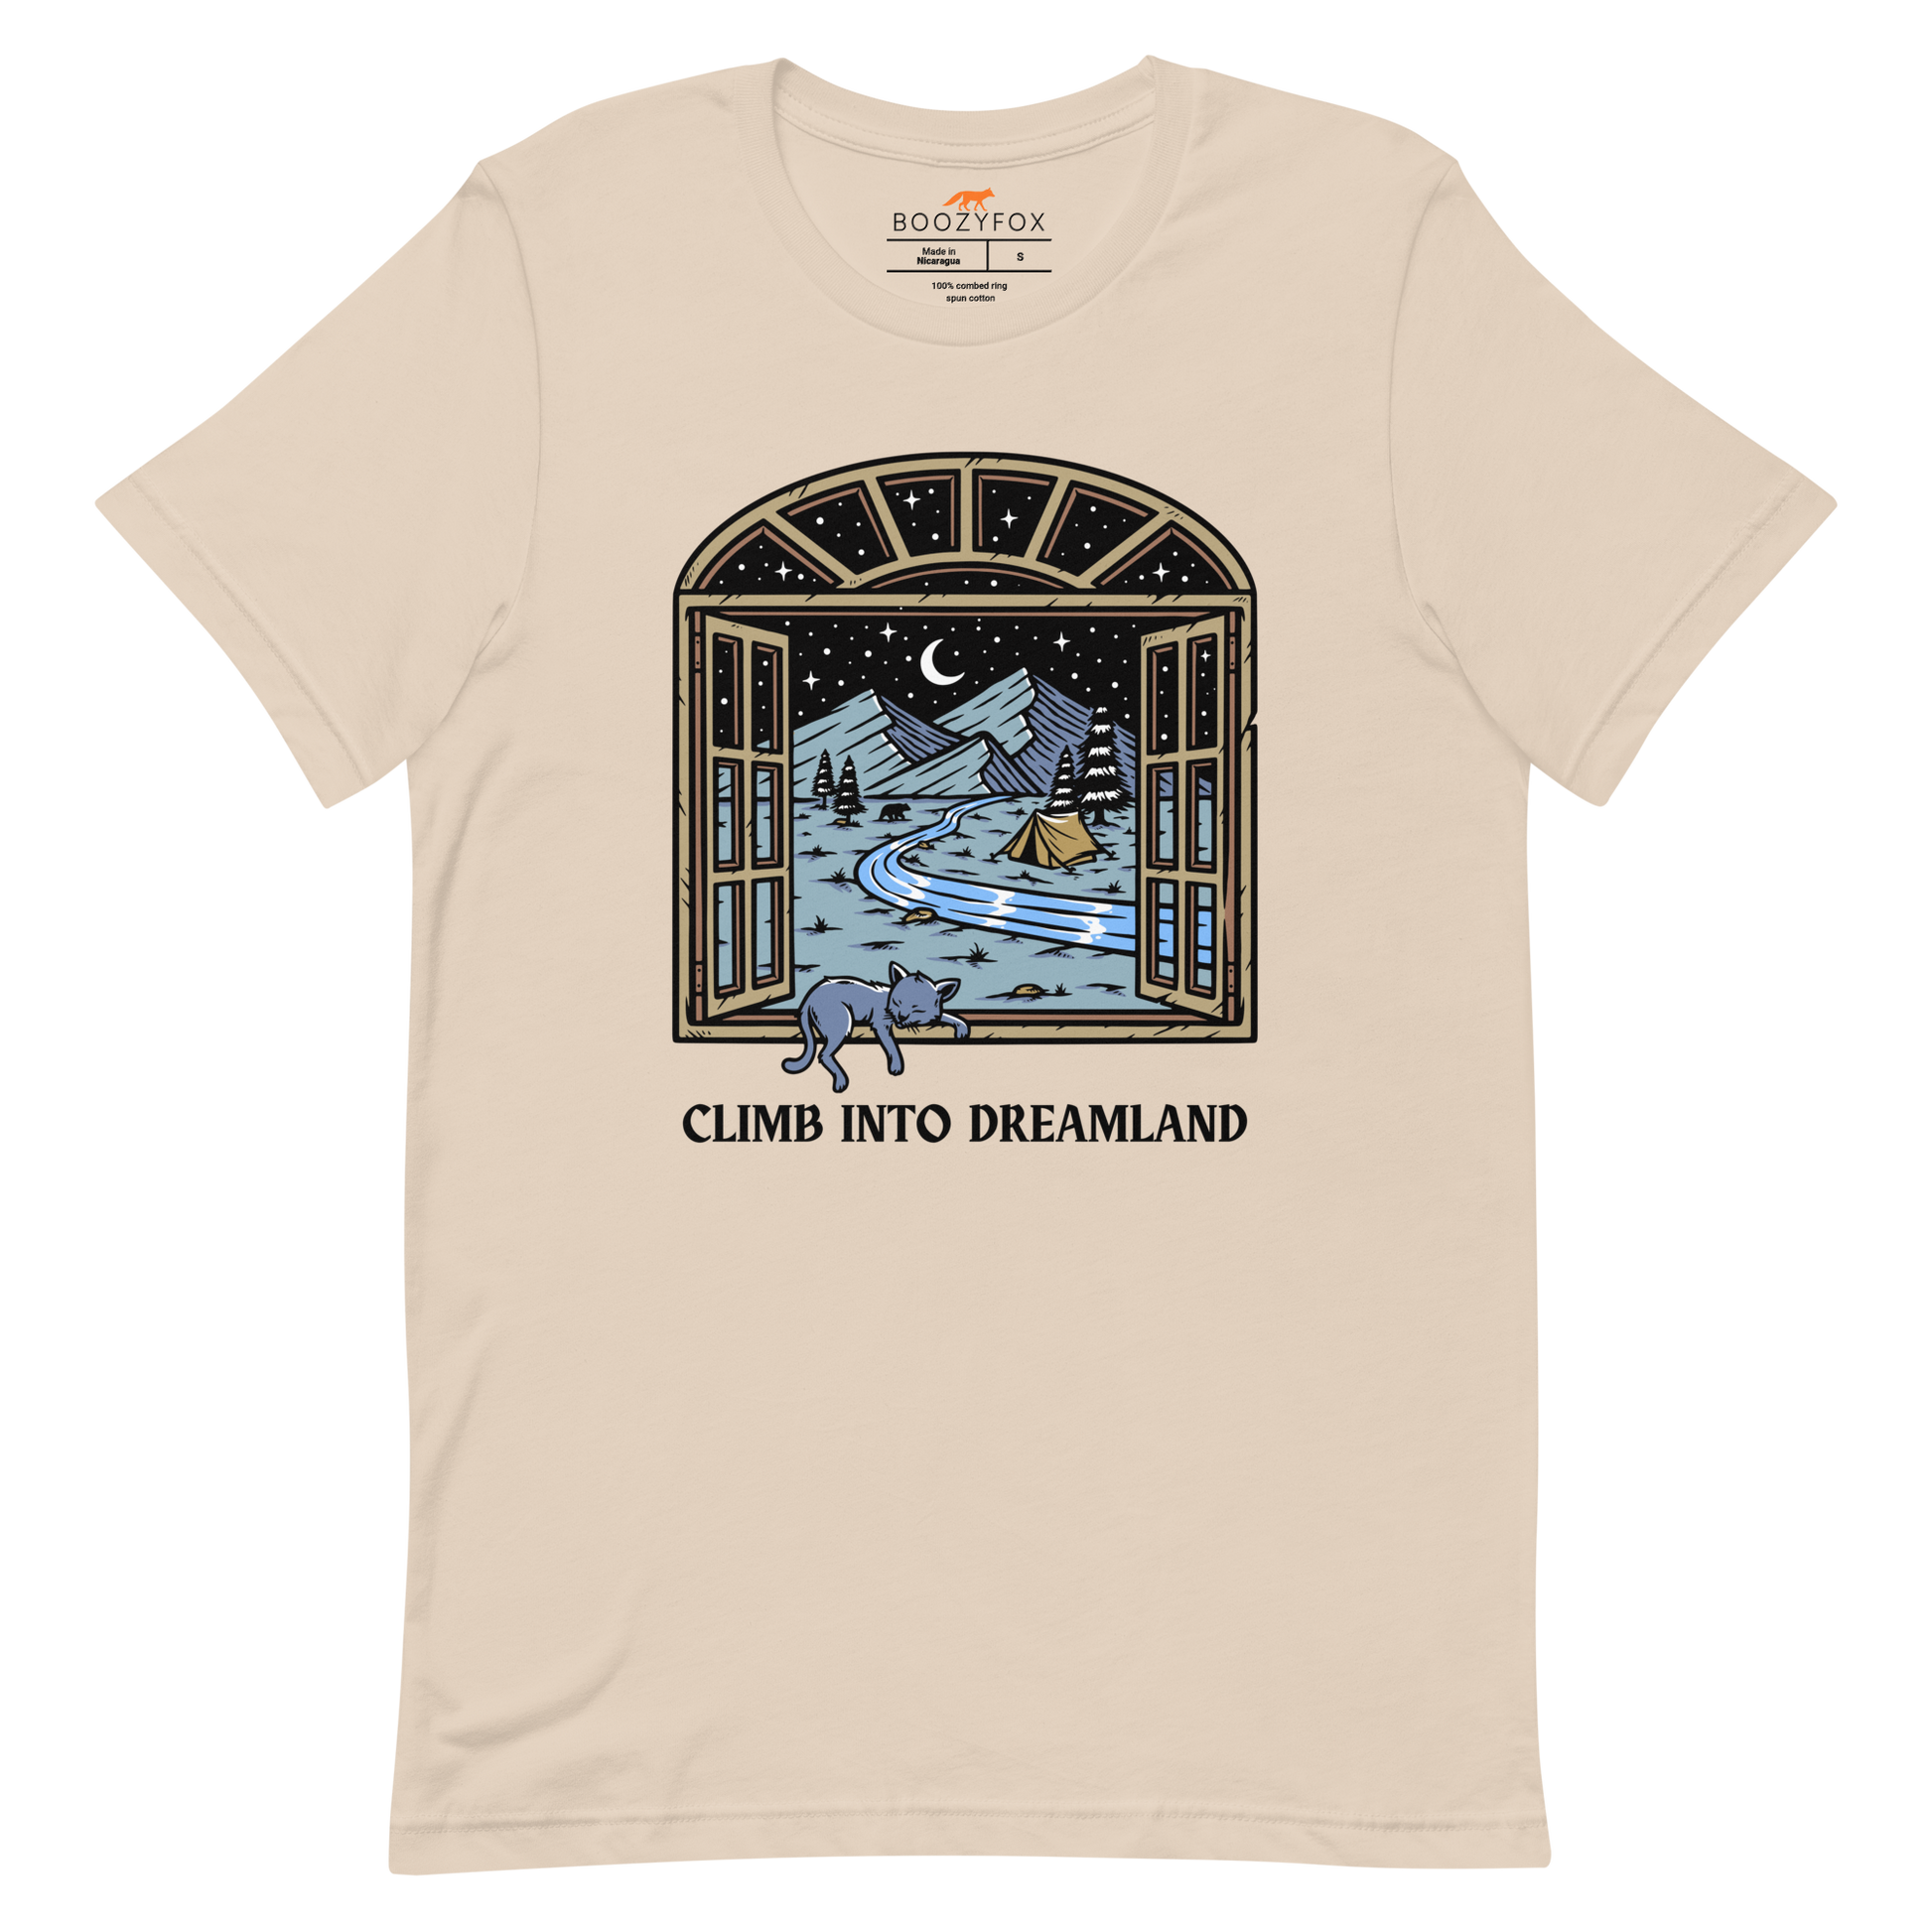 Soft Cream Premium Climb Into Dreamland Tee featuring a mesmerizing mountain view graphic on the chest - Cool Graphic Nature Tees - Boozy Fox